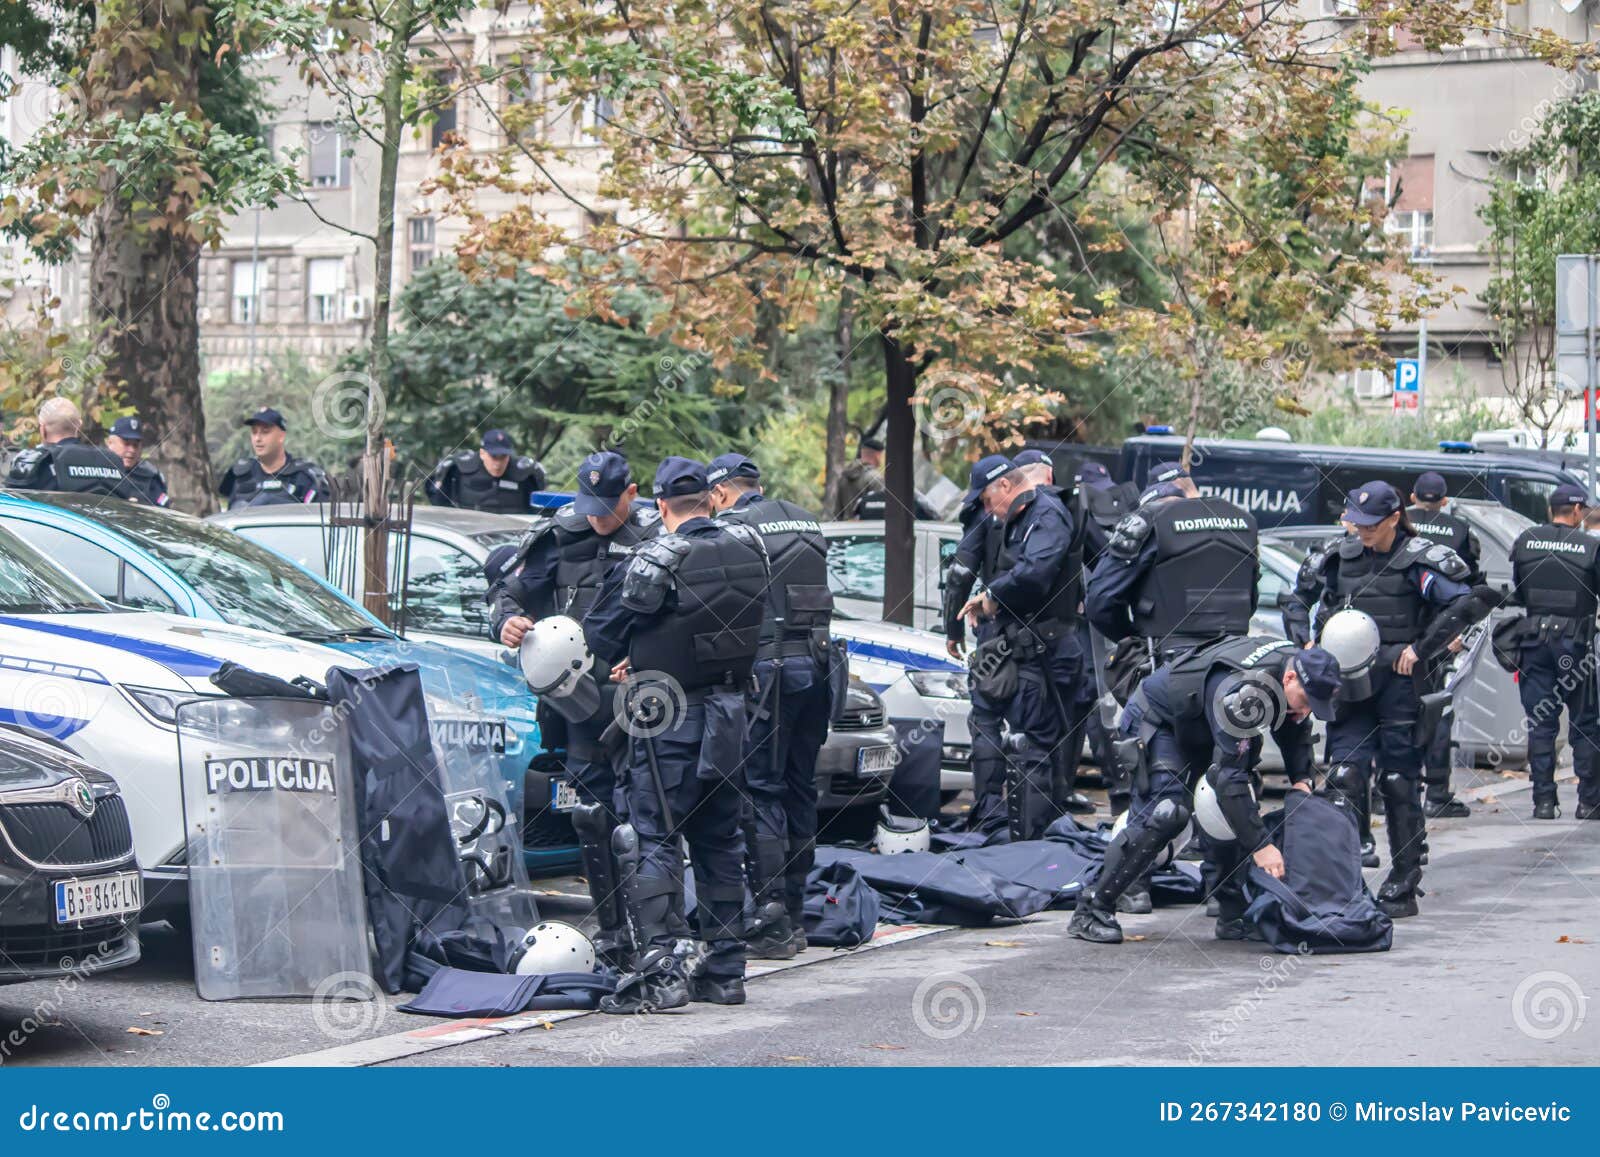 Police Forces And Members Of Special Forces Of Riot Police In Uniforms ...